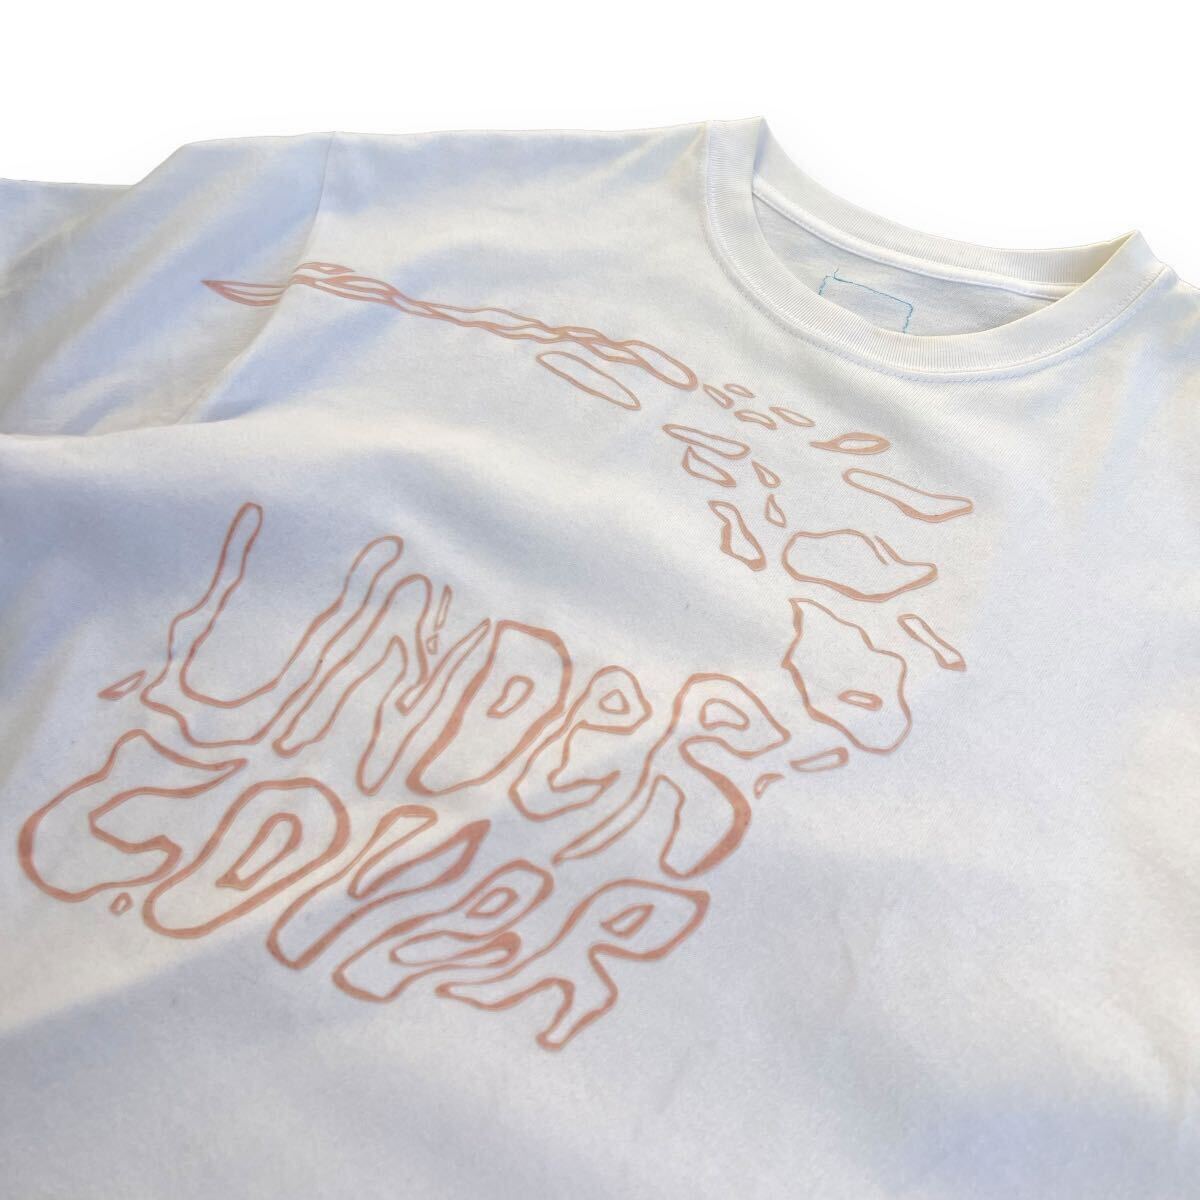 00s undercover t shirts print Jun takahashi Japanese label collection archive vintage used Japan designer _画像2